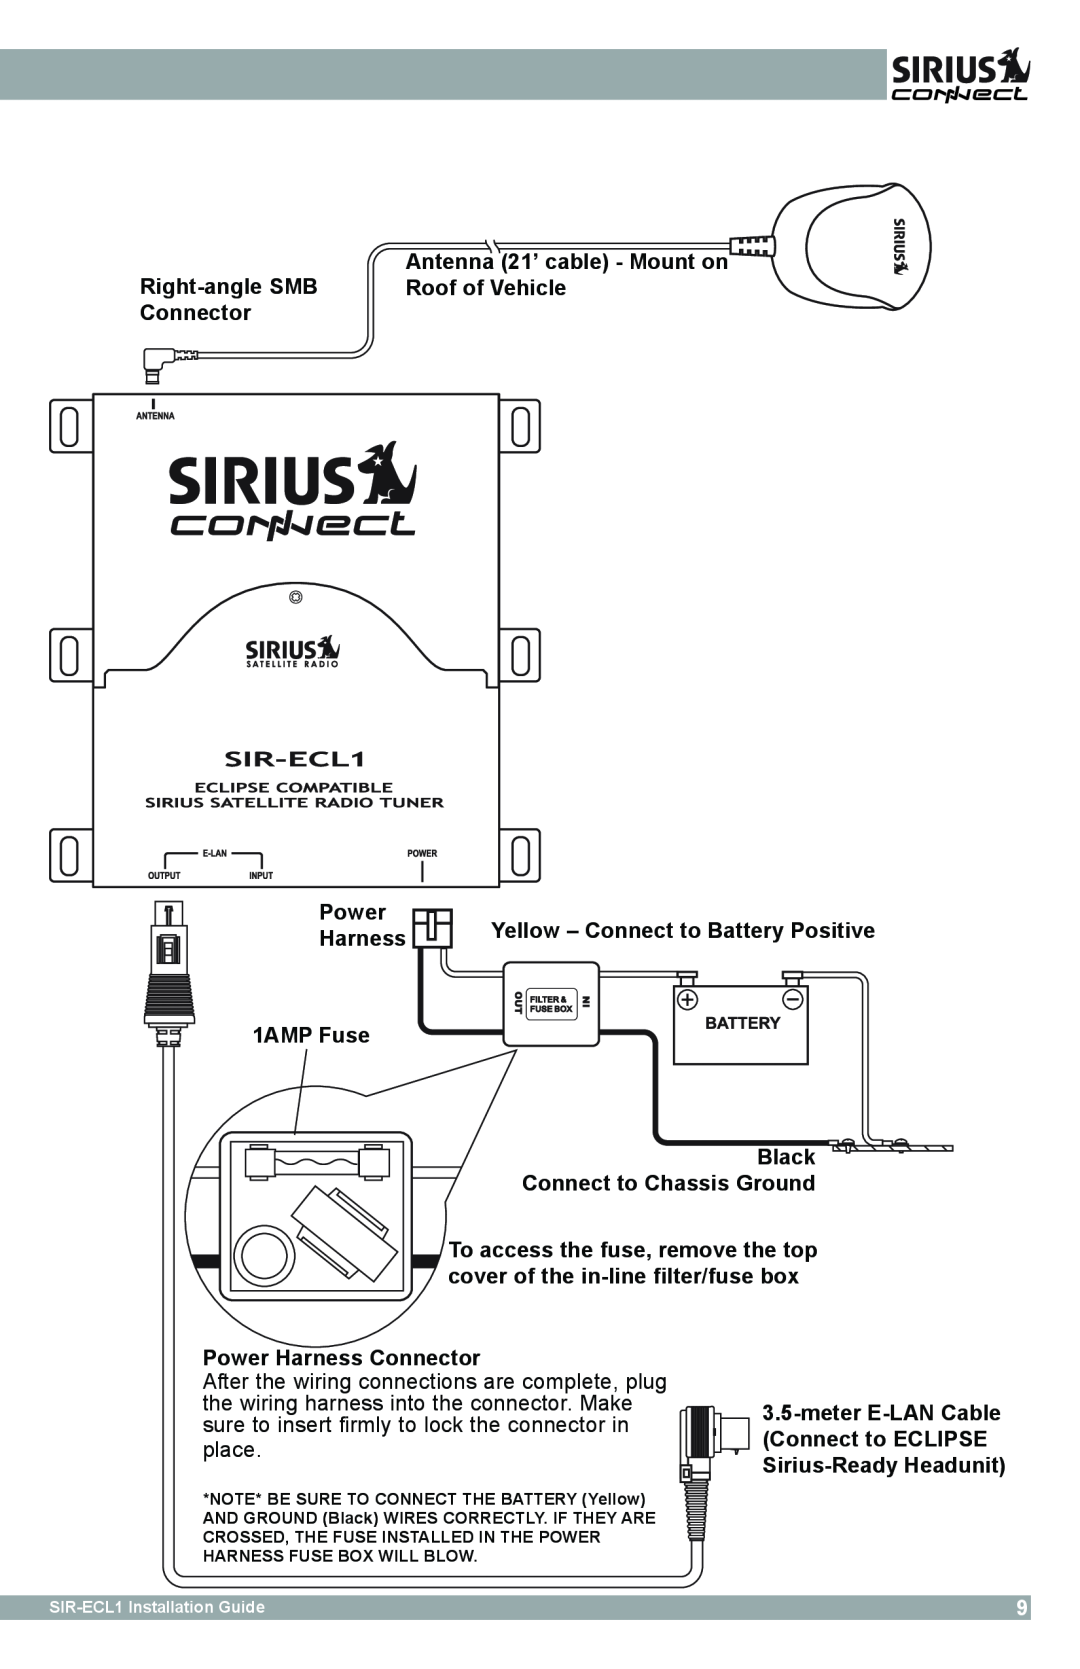 Sirius Satellite Radio SIR-ECL1 manual Antenna 21’ cable - Mount on, Right-angleSMB Roof of Vehicle Connector 